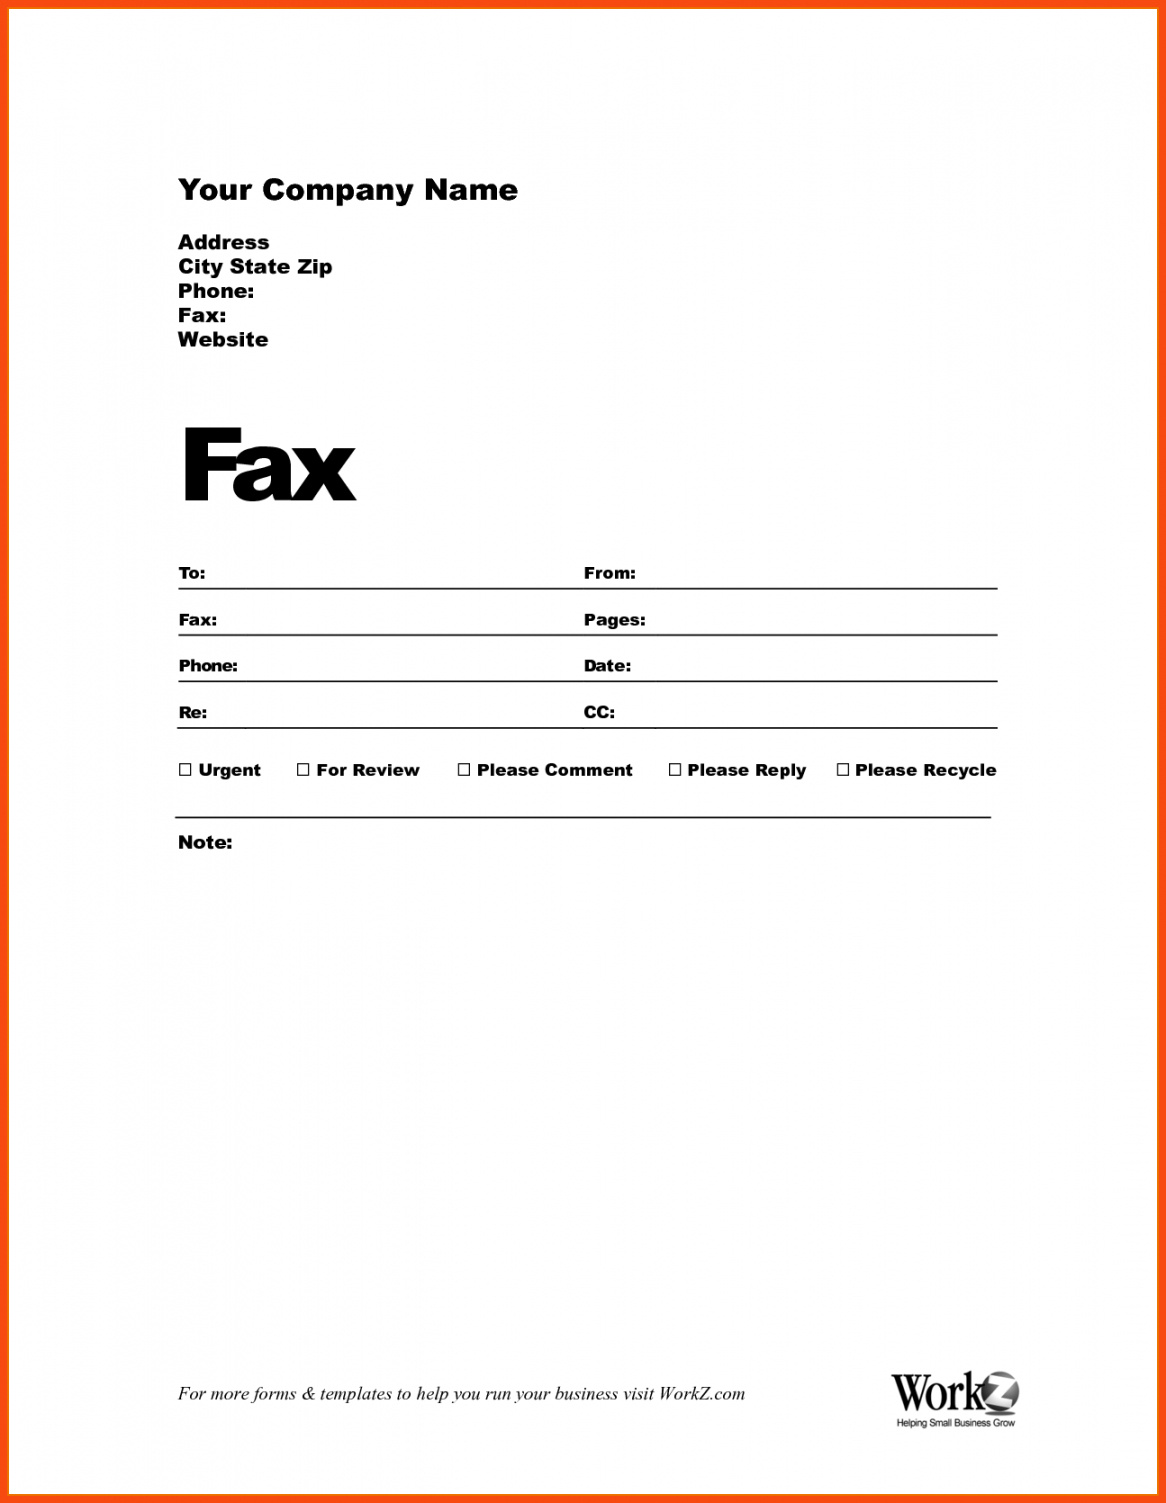 How To Fill Out A Fax Cover Sheet [Free]^^ Fax Cover Sheet Template - Free Printable Fax Cover Sheet